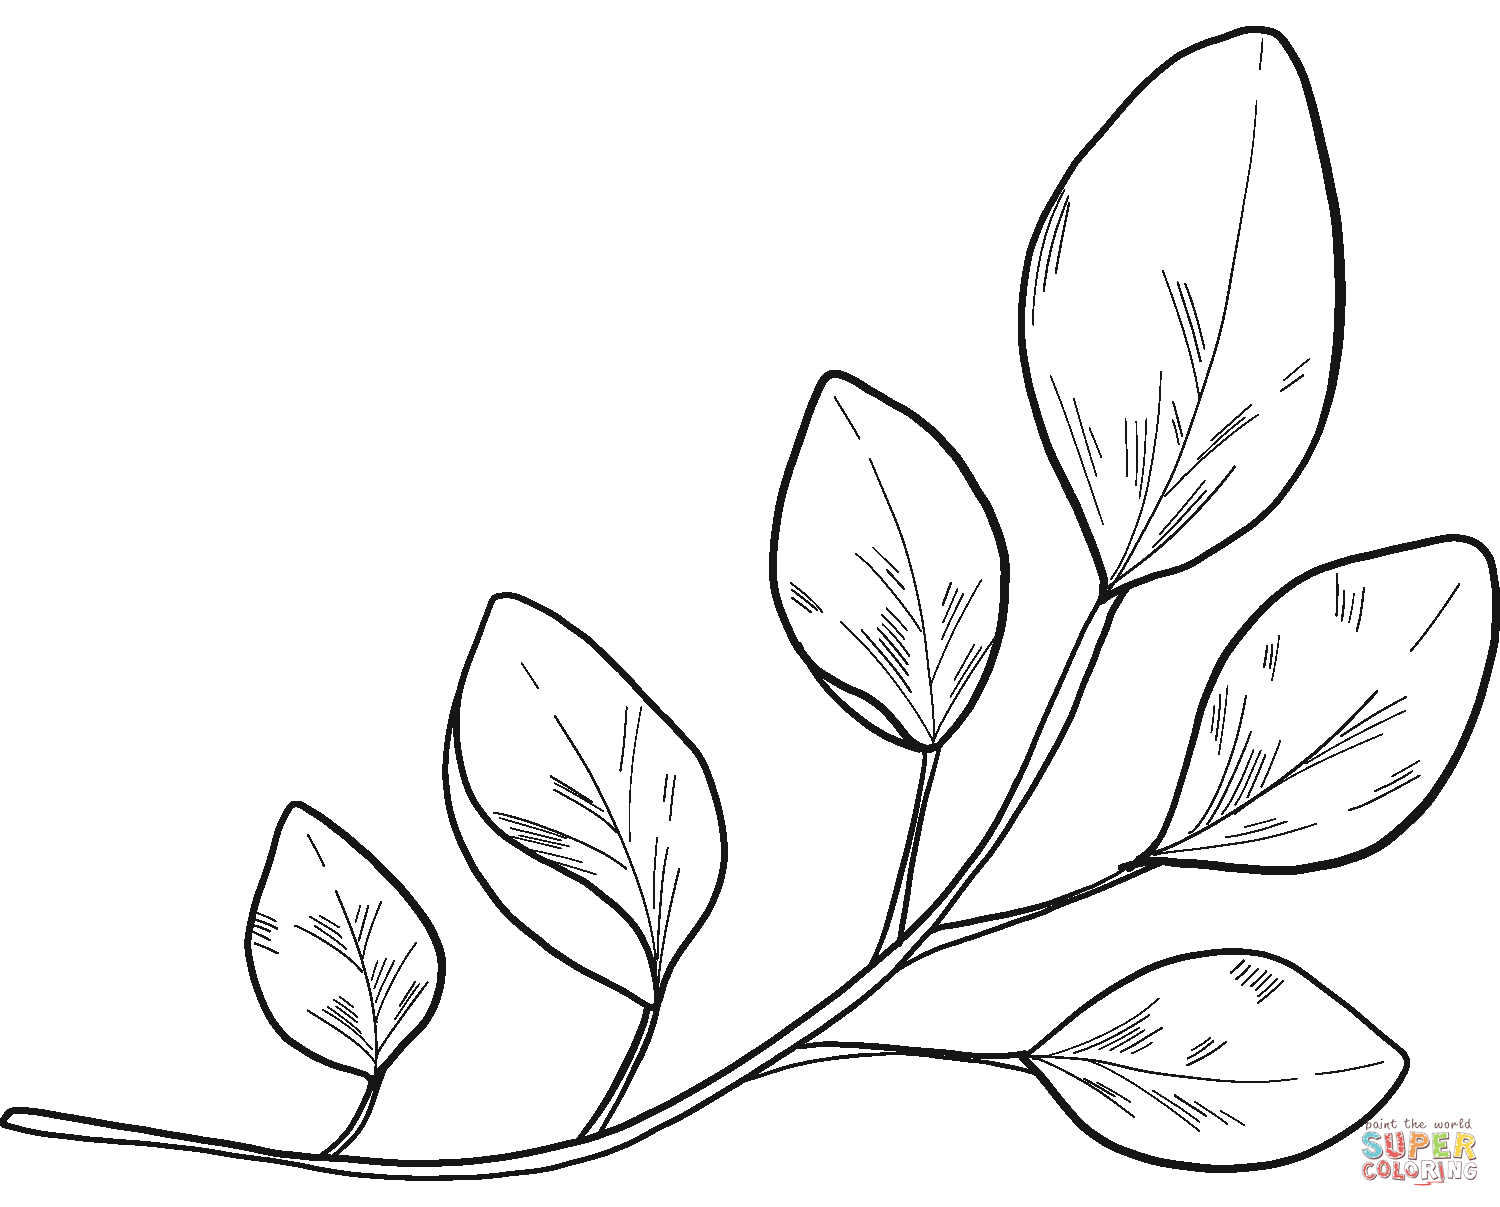 Eucalyptus Branch coloring page | Free Printable Coloring Pages